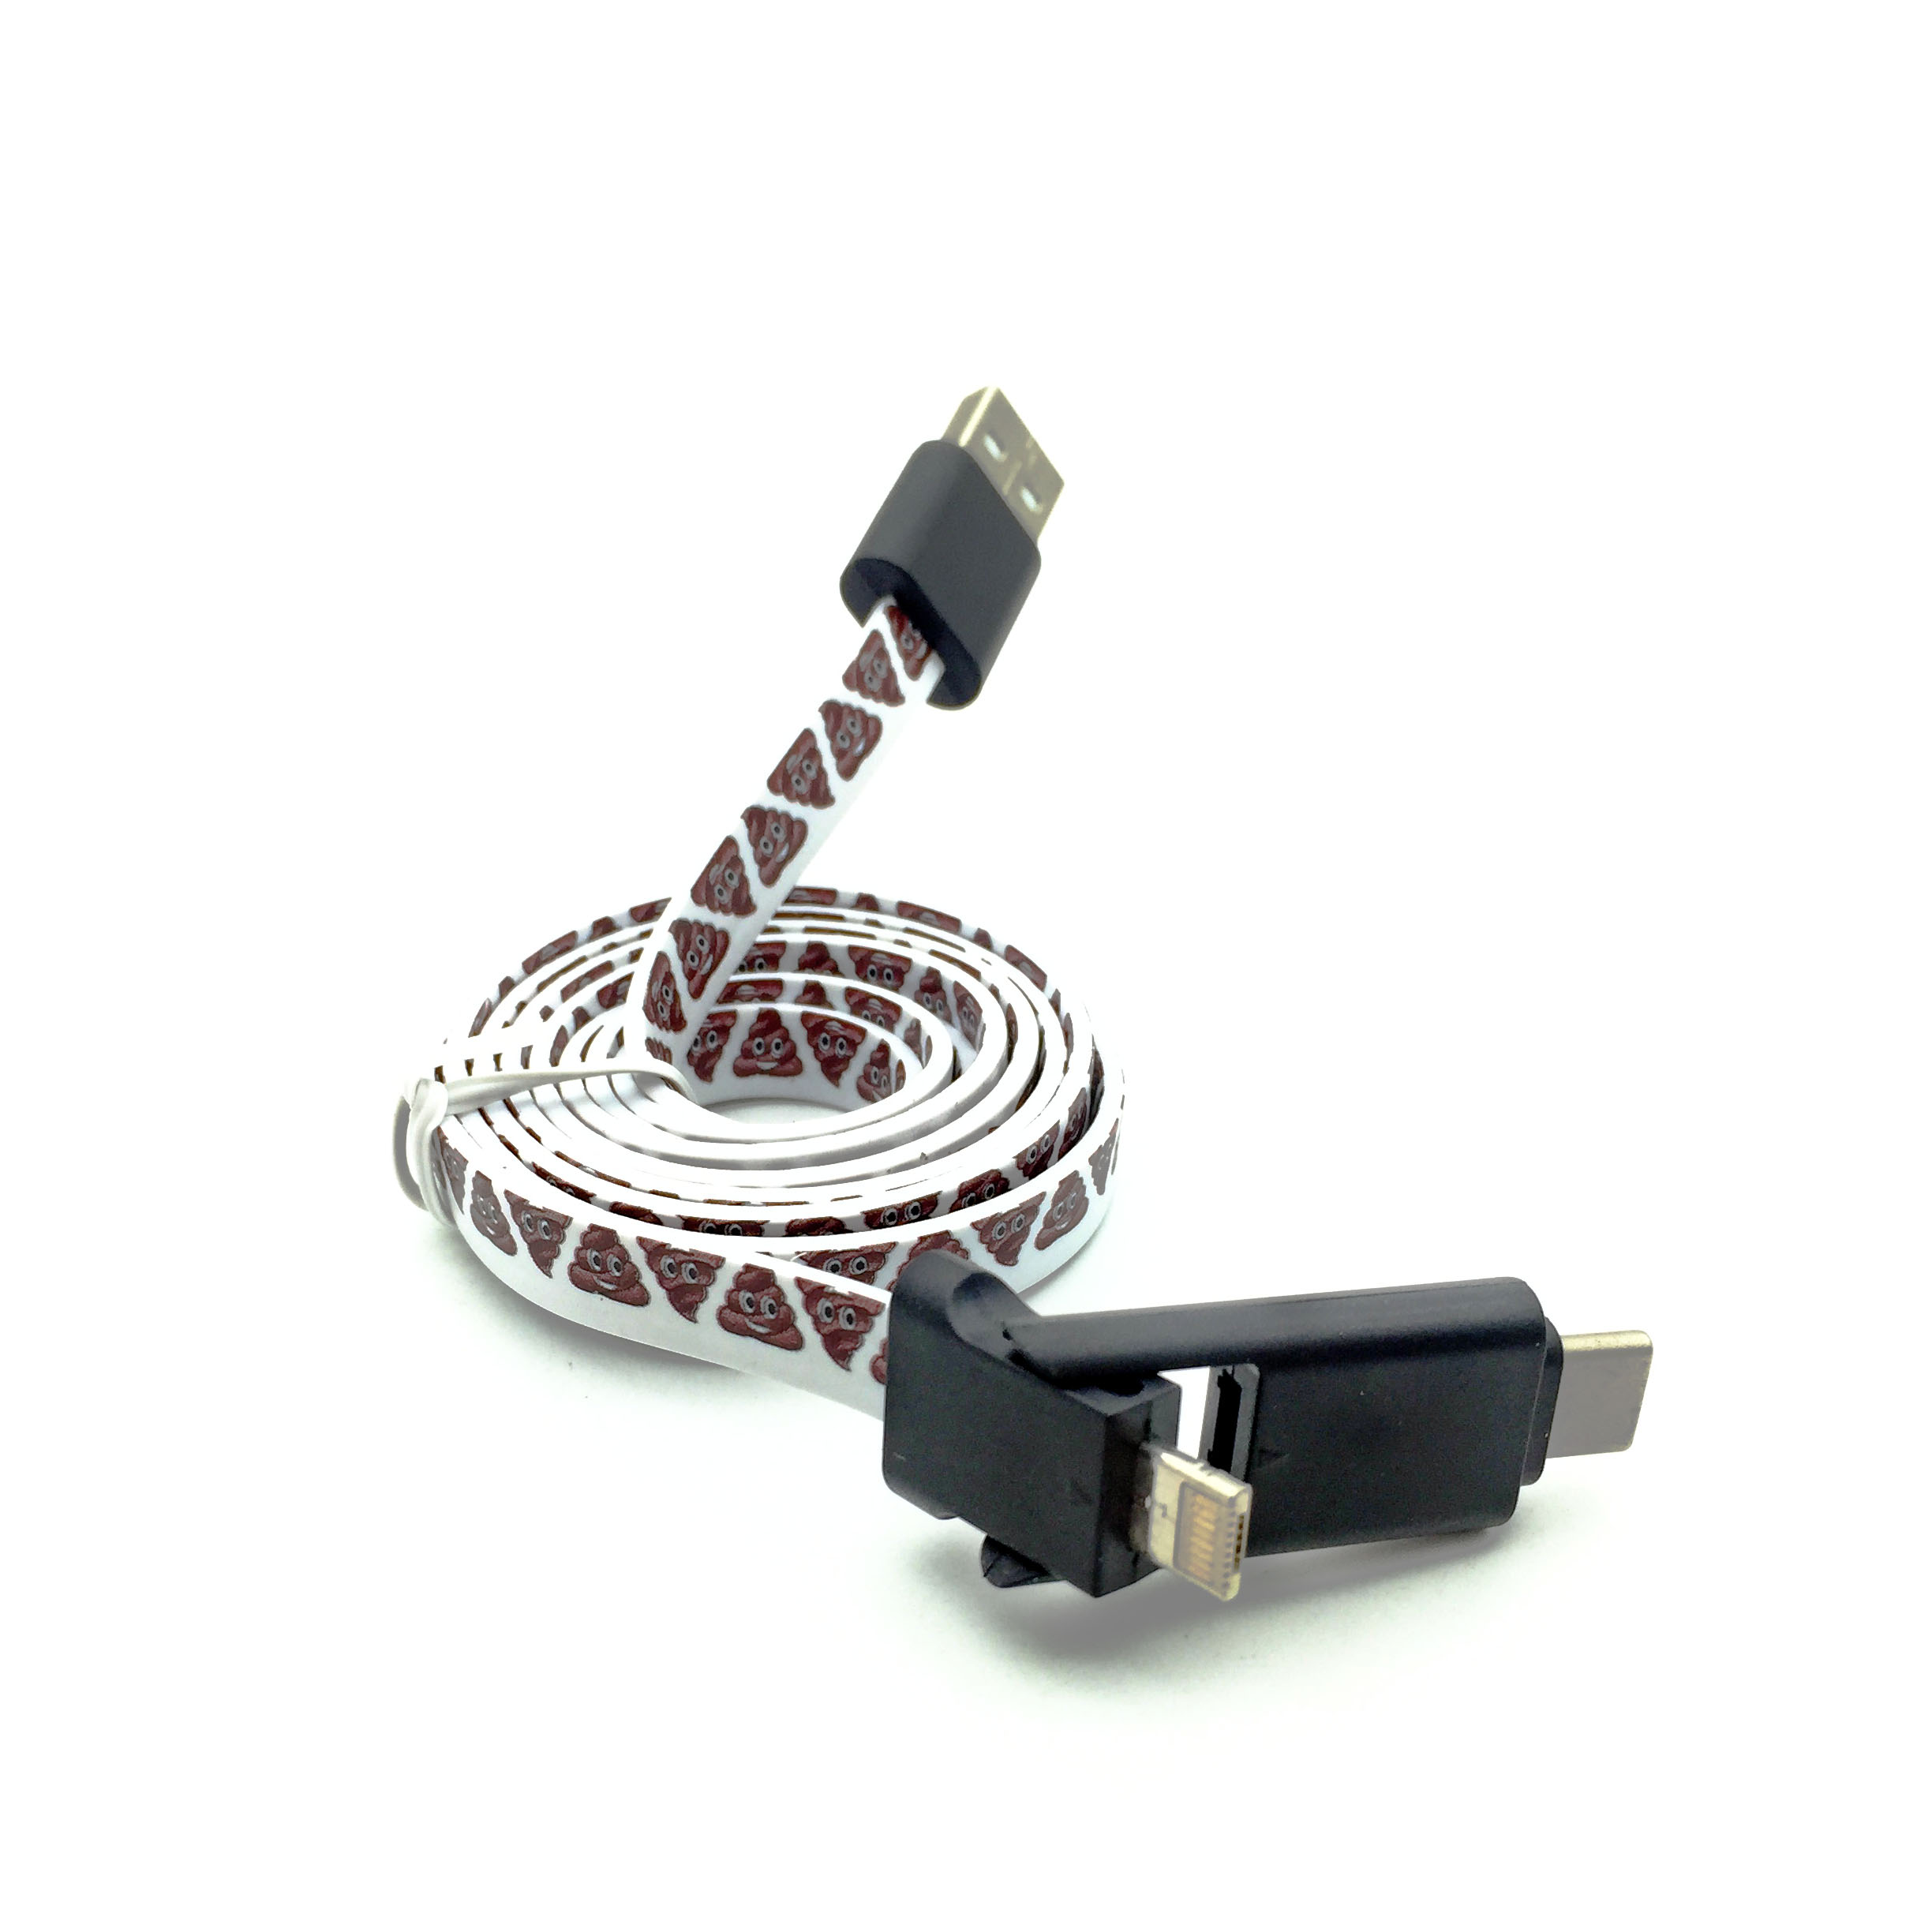 3 in 1 Flat Noodle USB Charging Cable Lanyard